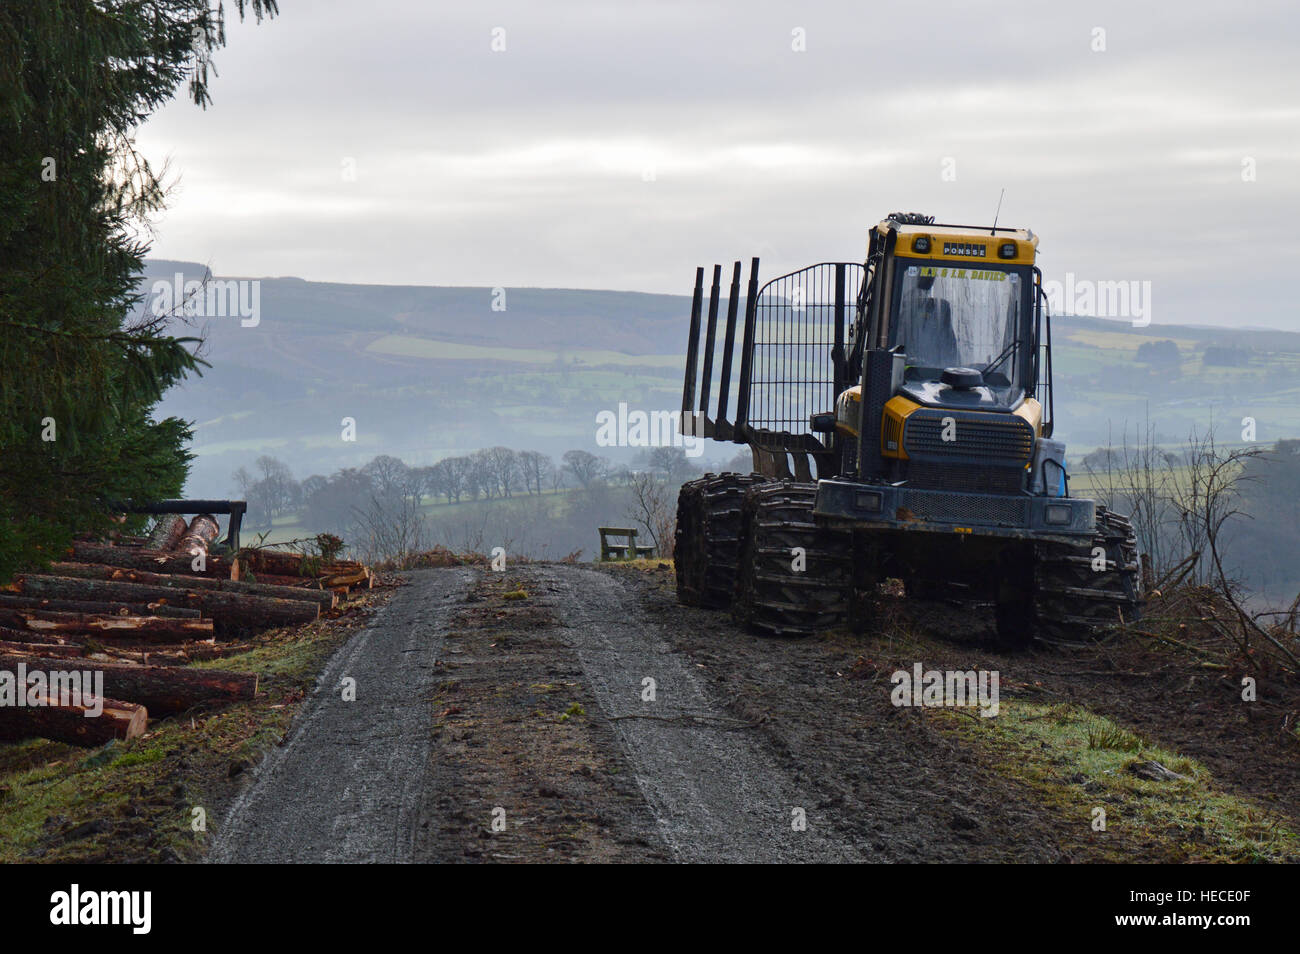 Forestry equipment with felled larch trees (for disease control) Garth Bank, Garth, Powys, Wales Stock Photo